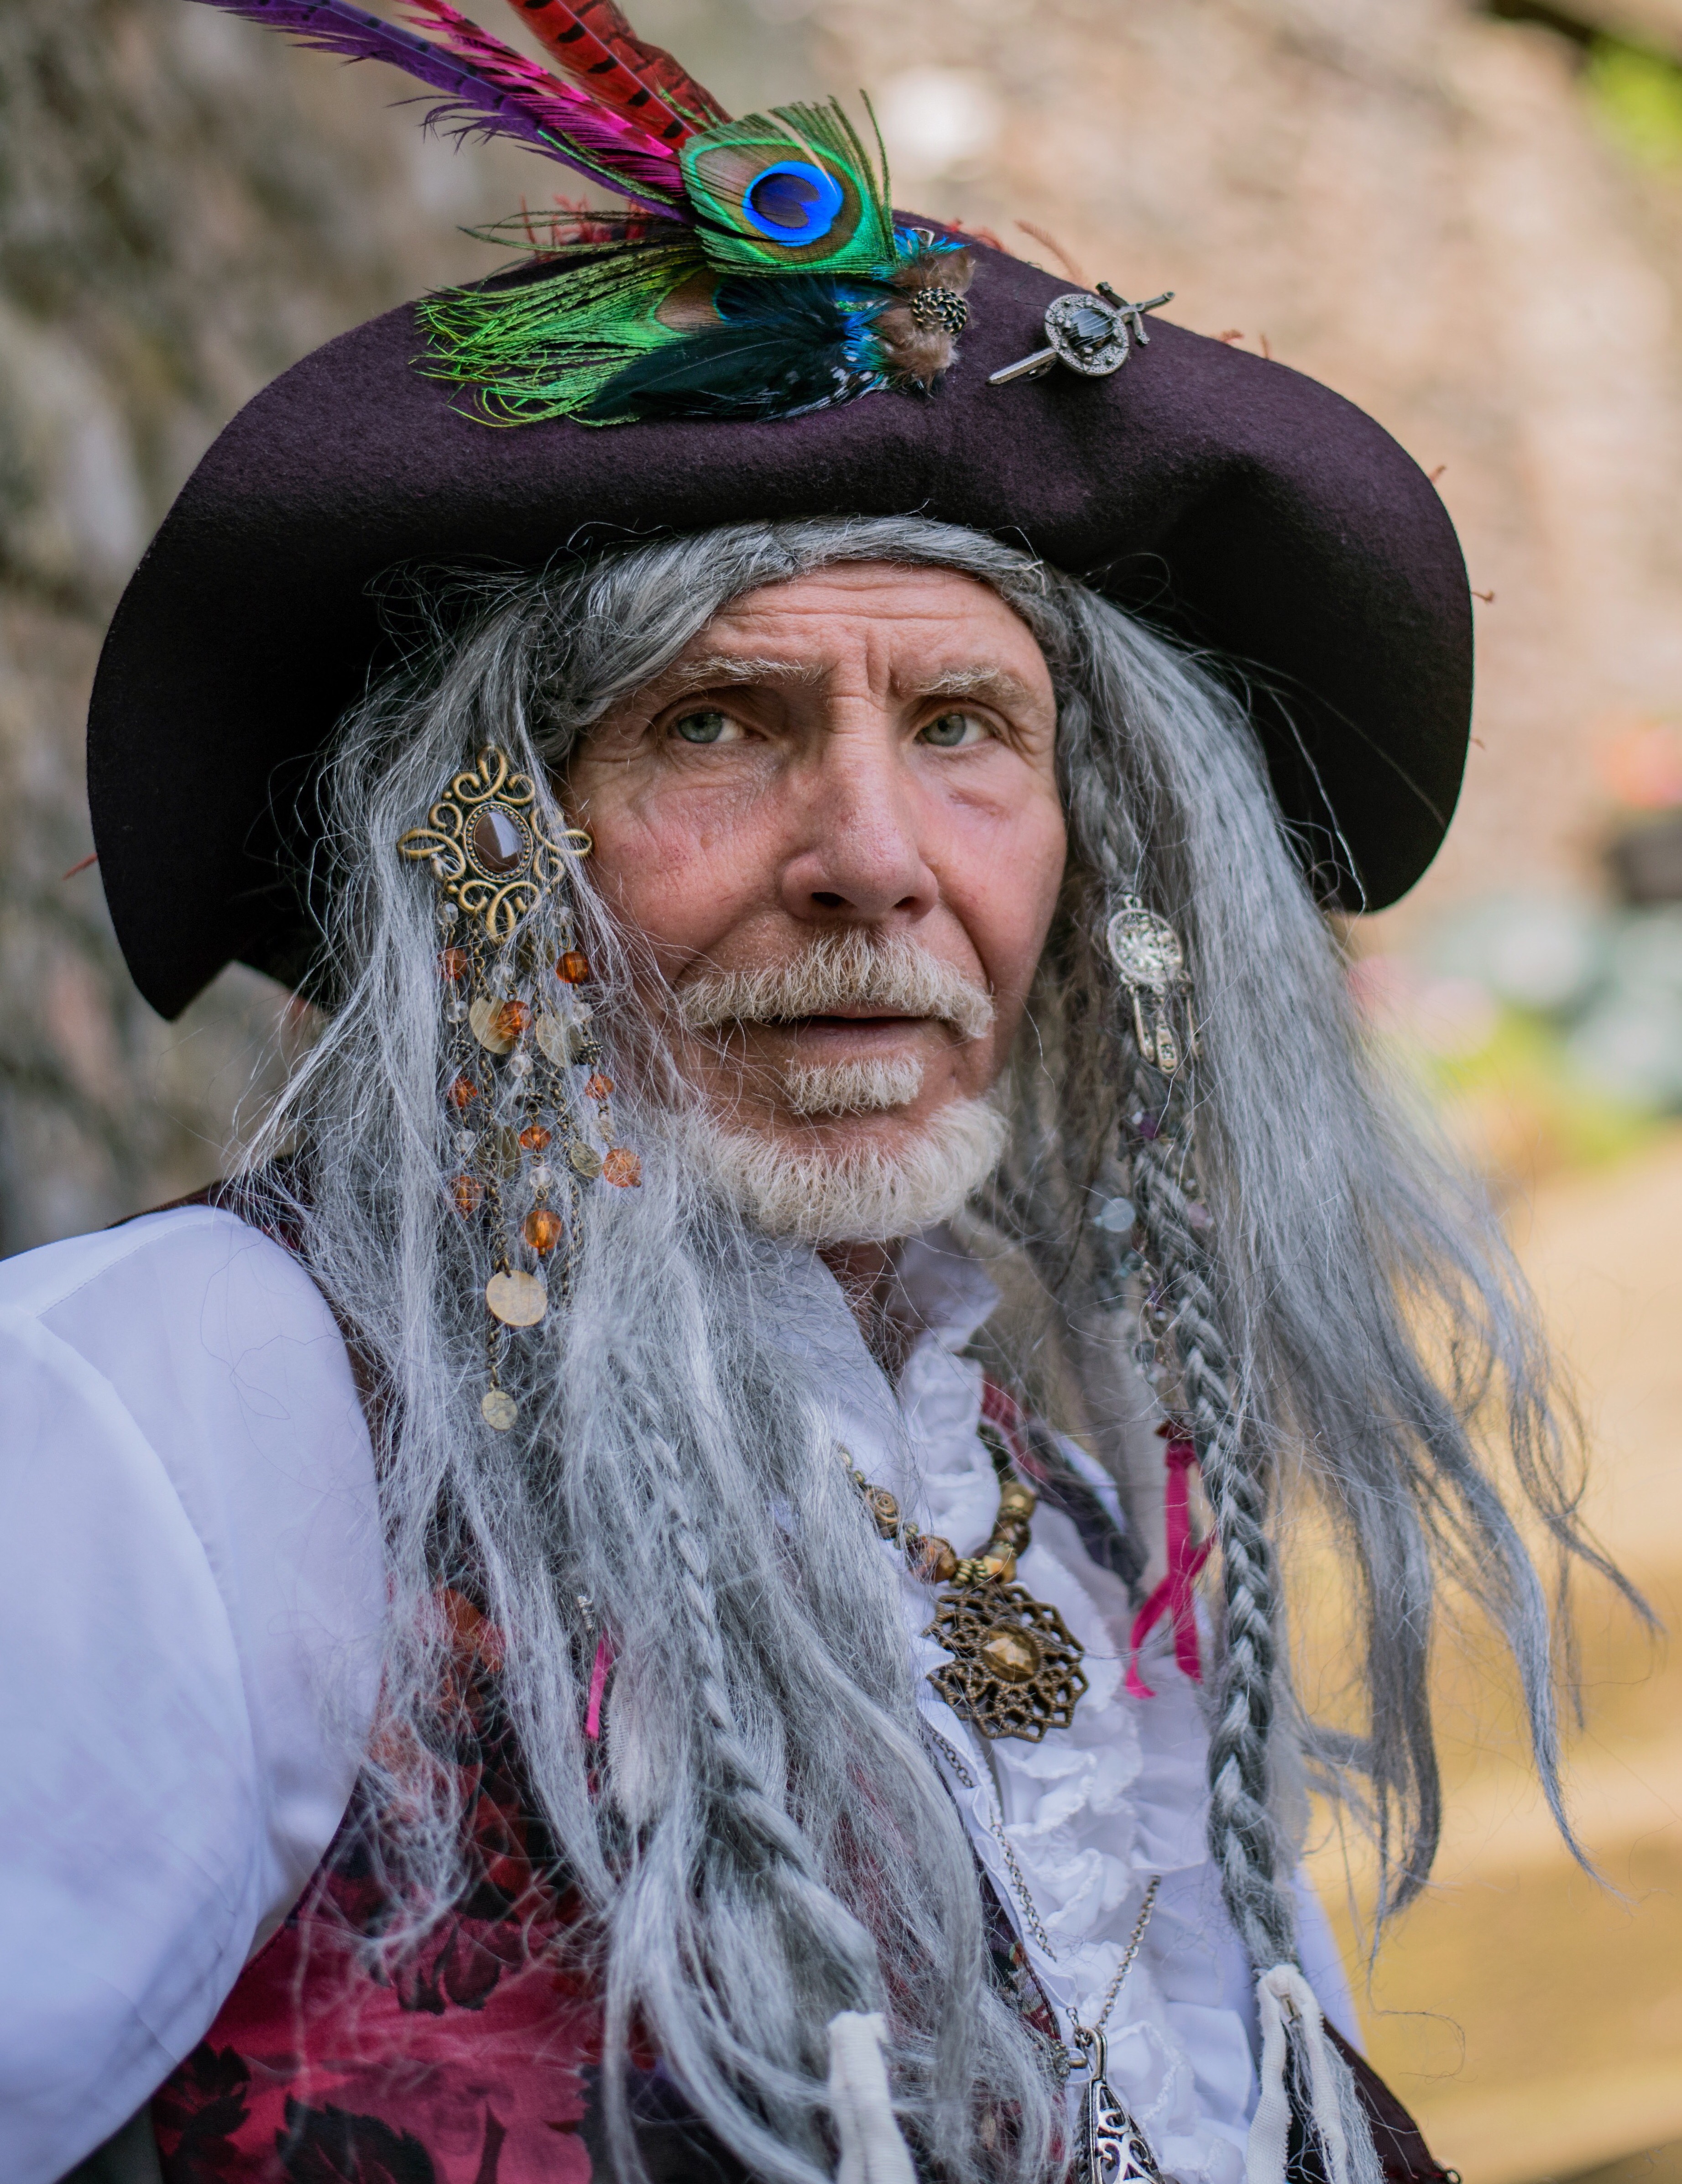 An old Pirate